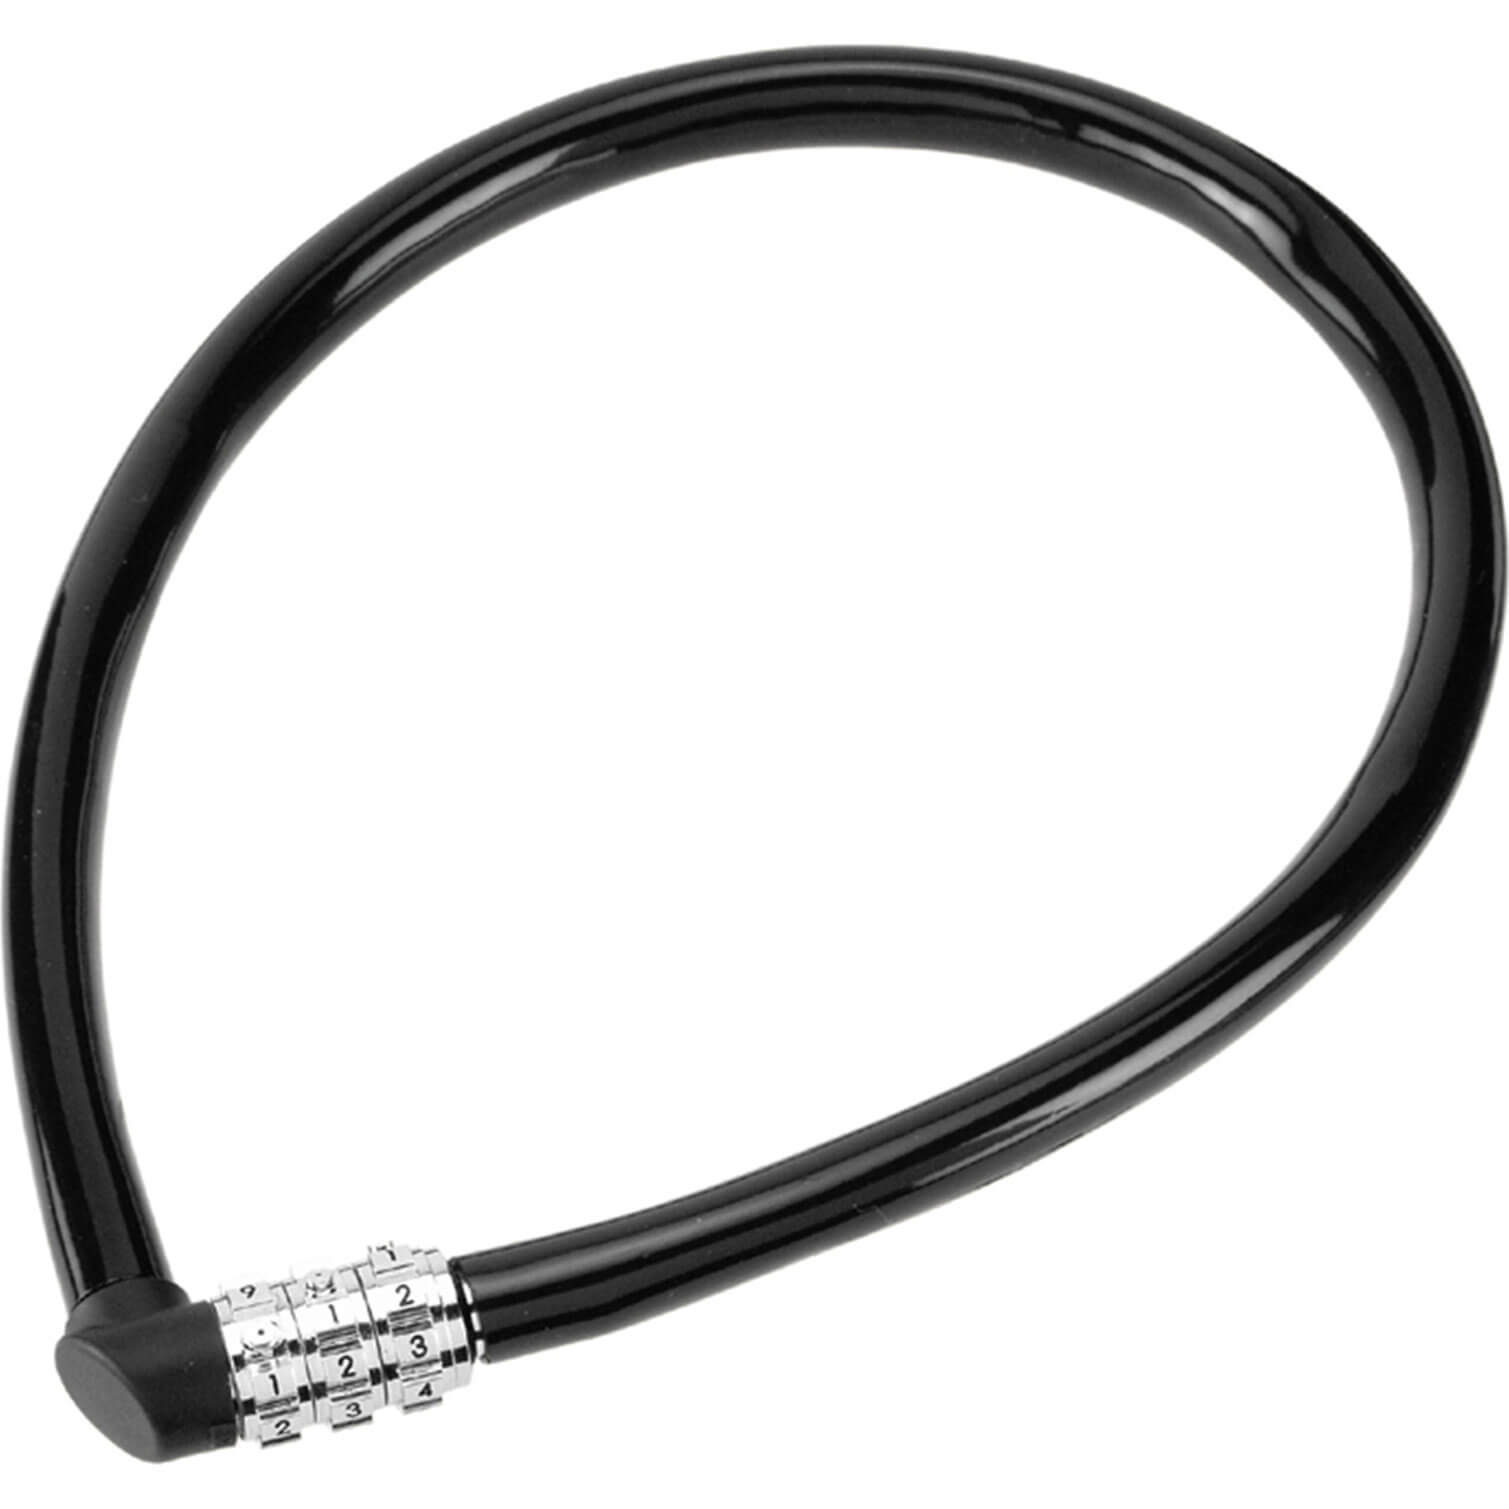 Image of abus 1100 series 1200mm combination cable bicycle lock black 7mm diameter